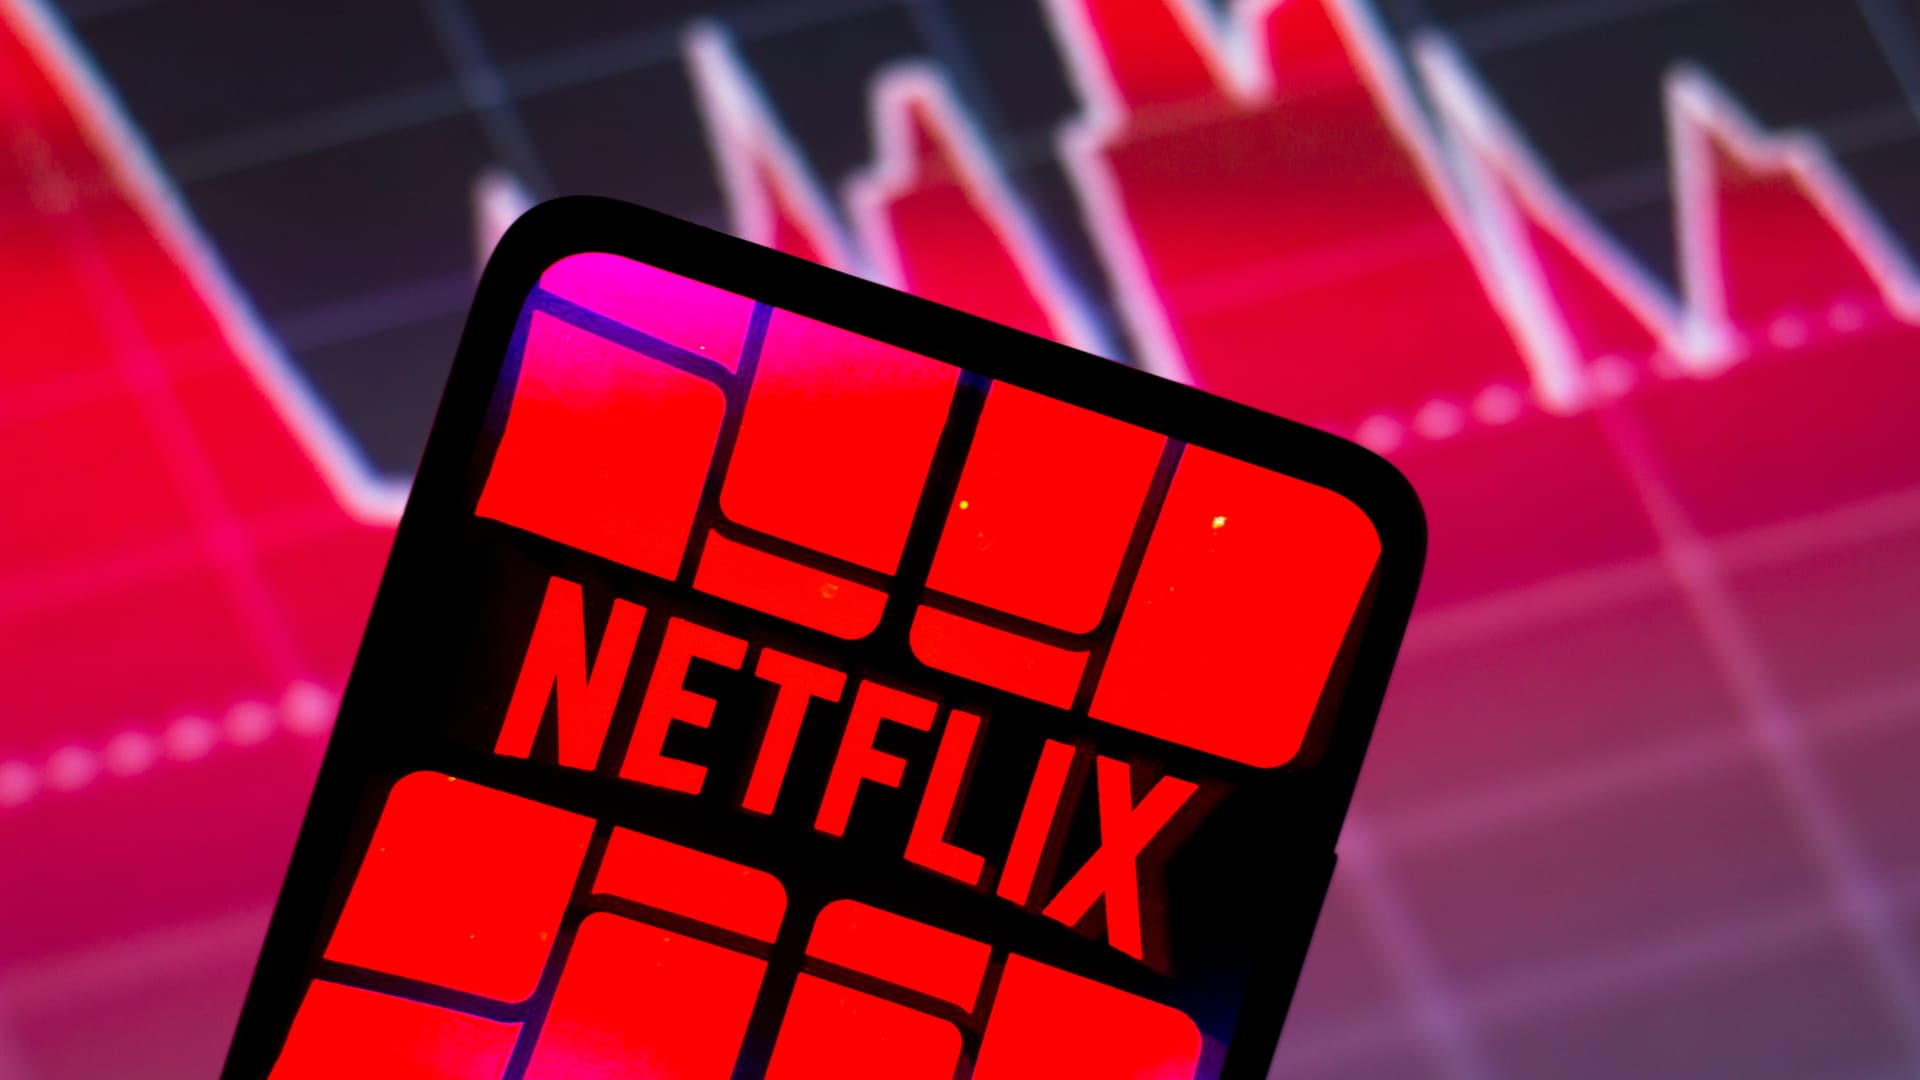 Netflix’s binge-release model is under new scrutiny as the streaming giant struggles